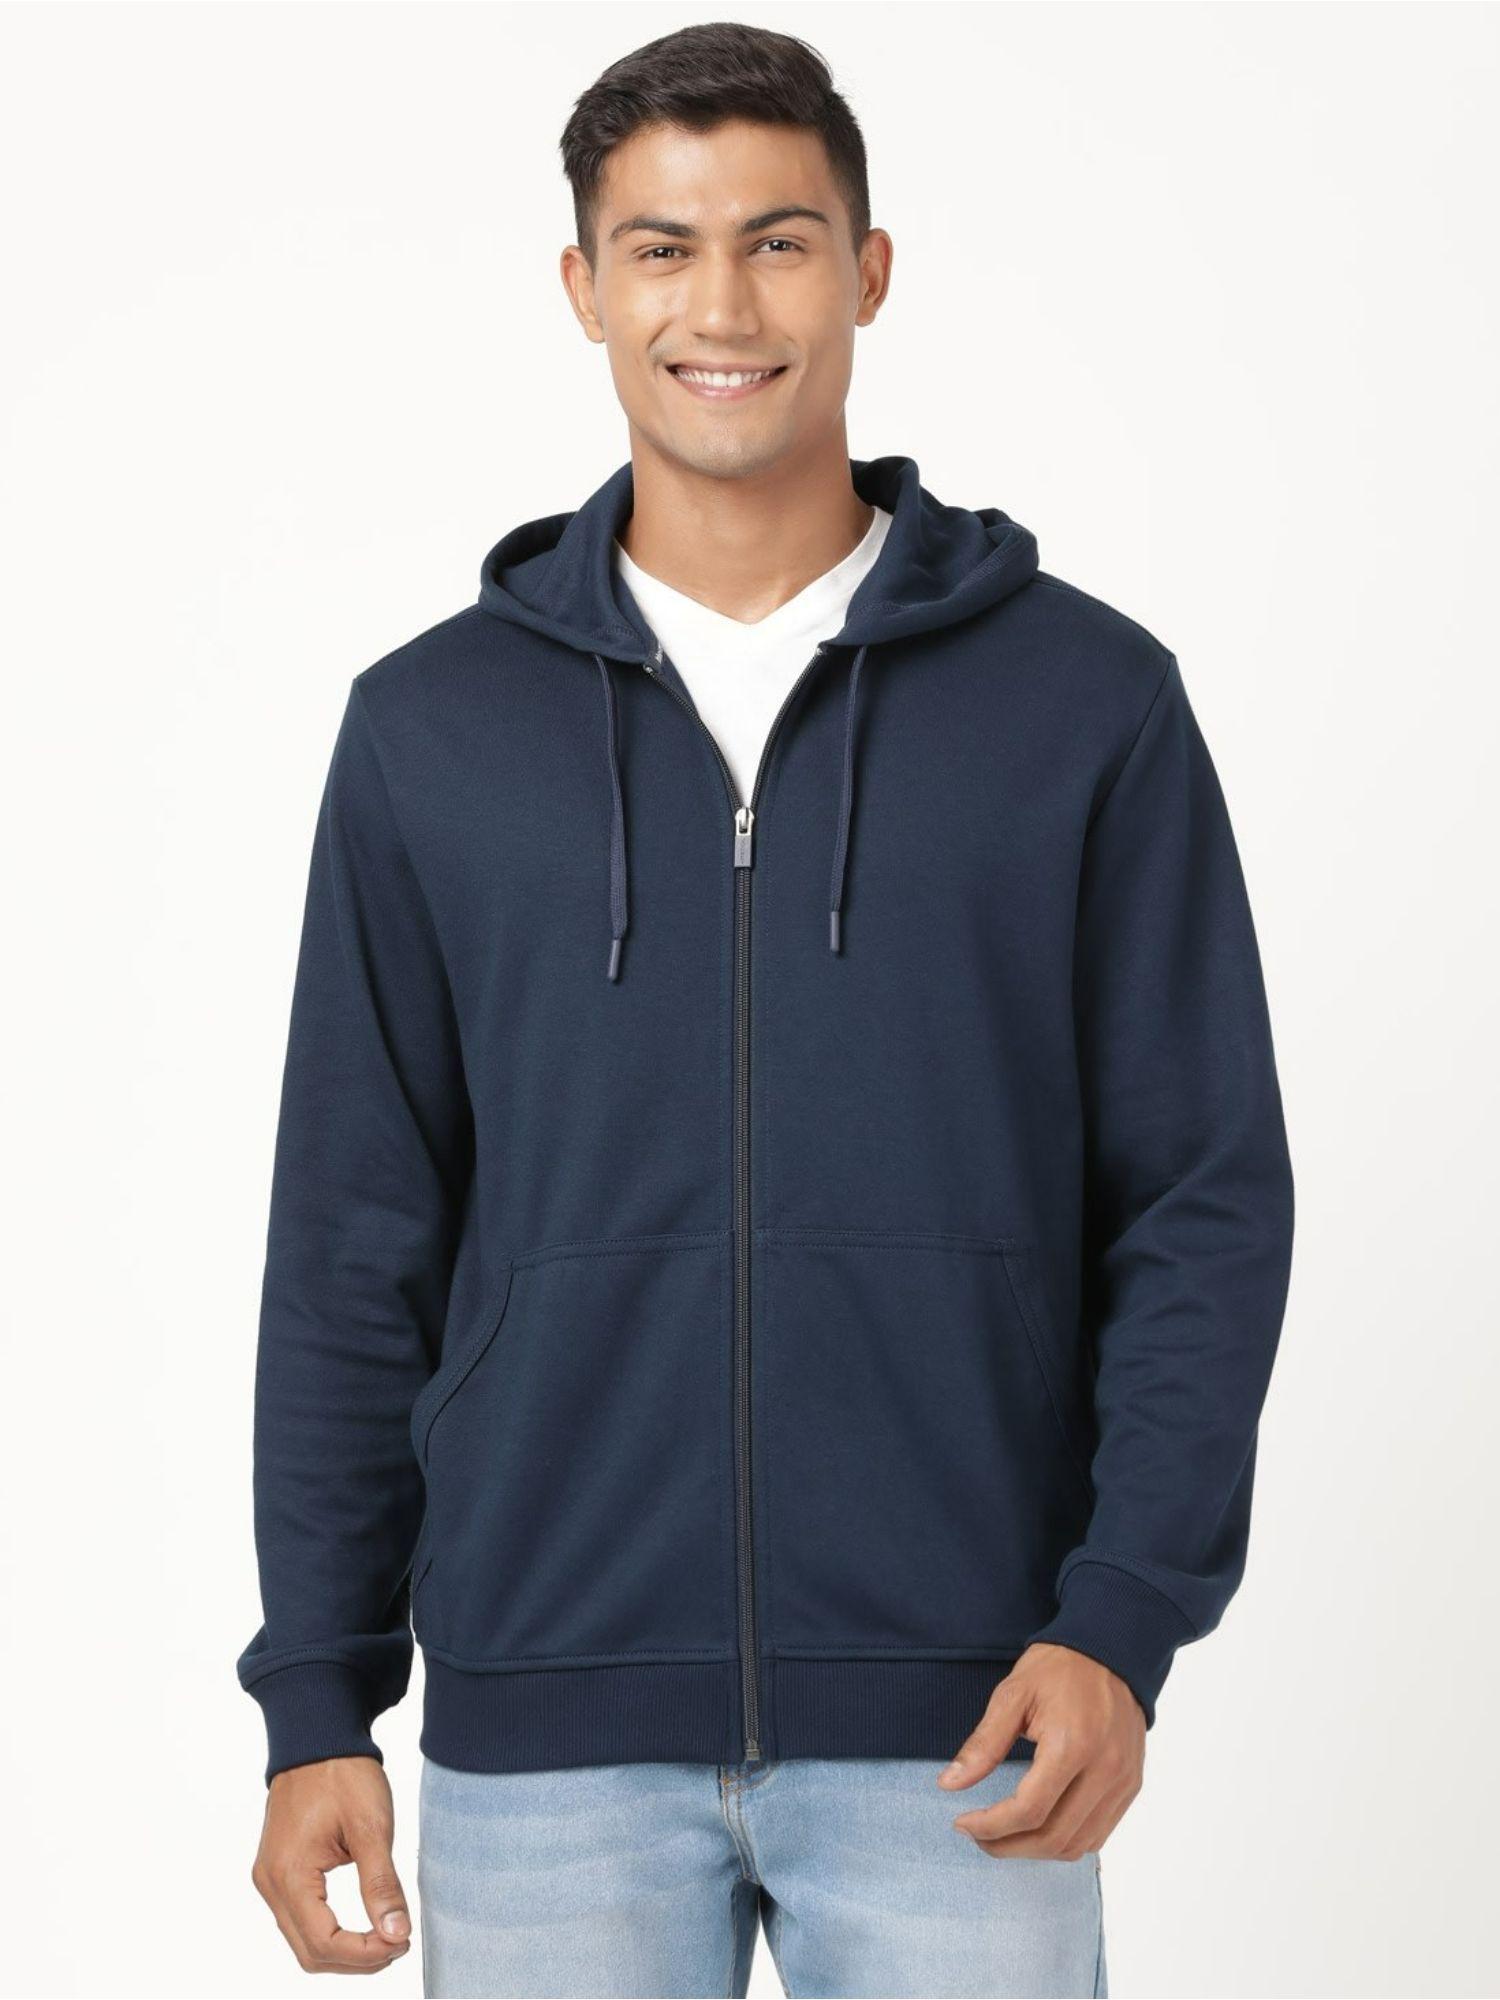 am61 mens cotton rich pique solid hoodie jacket with ribbed cuffs-blue